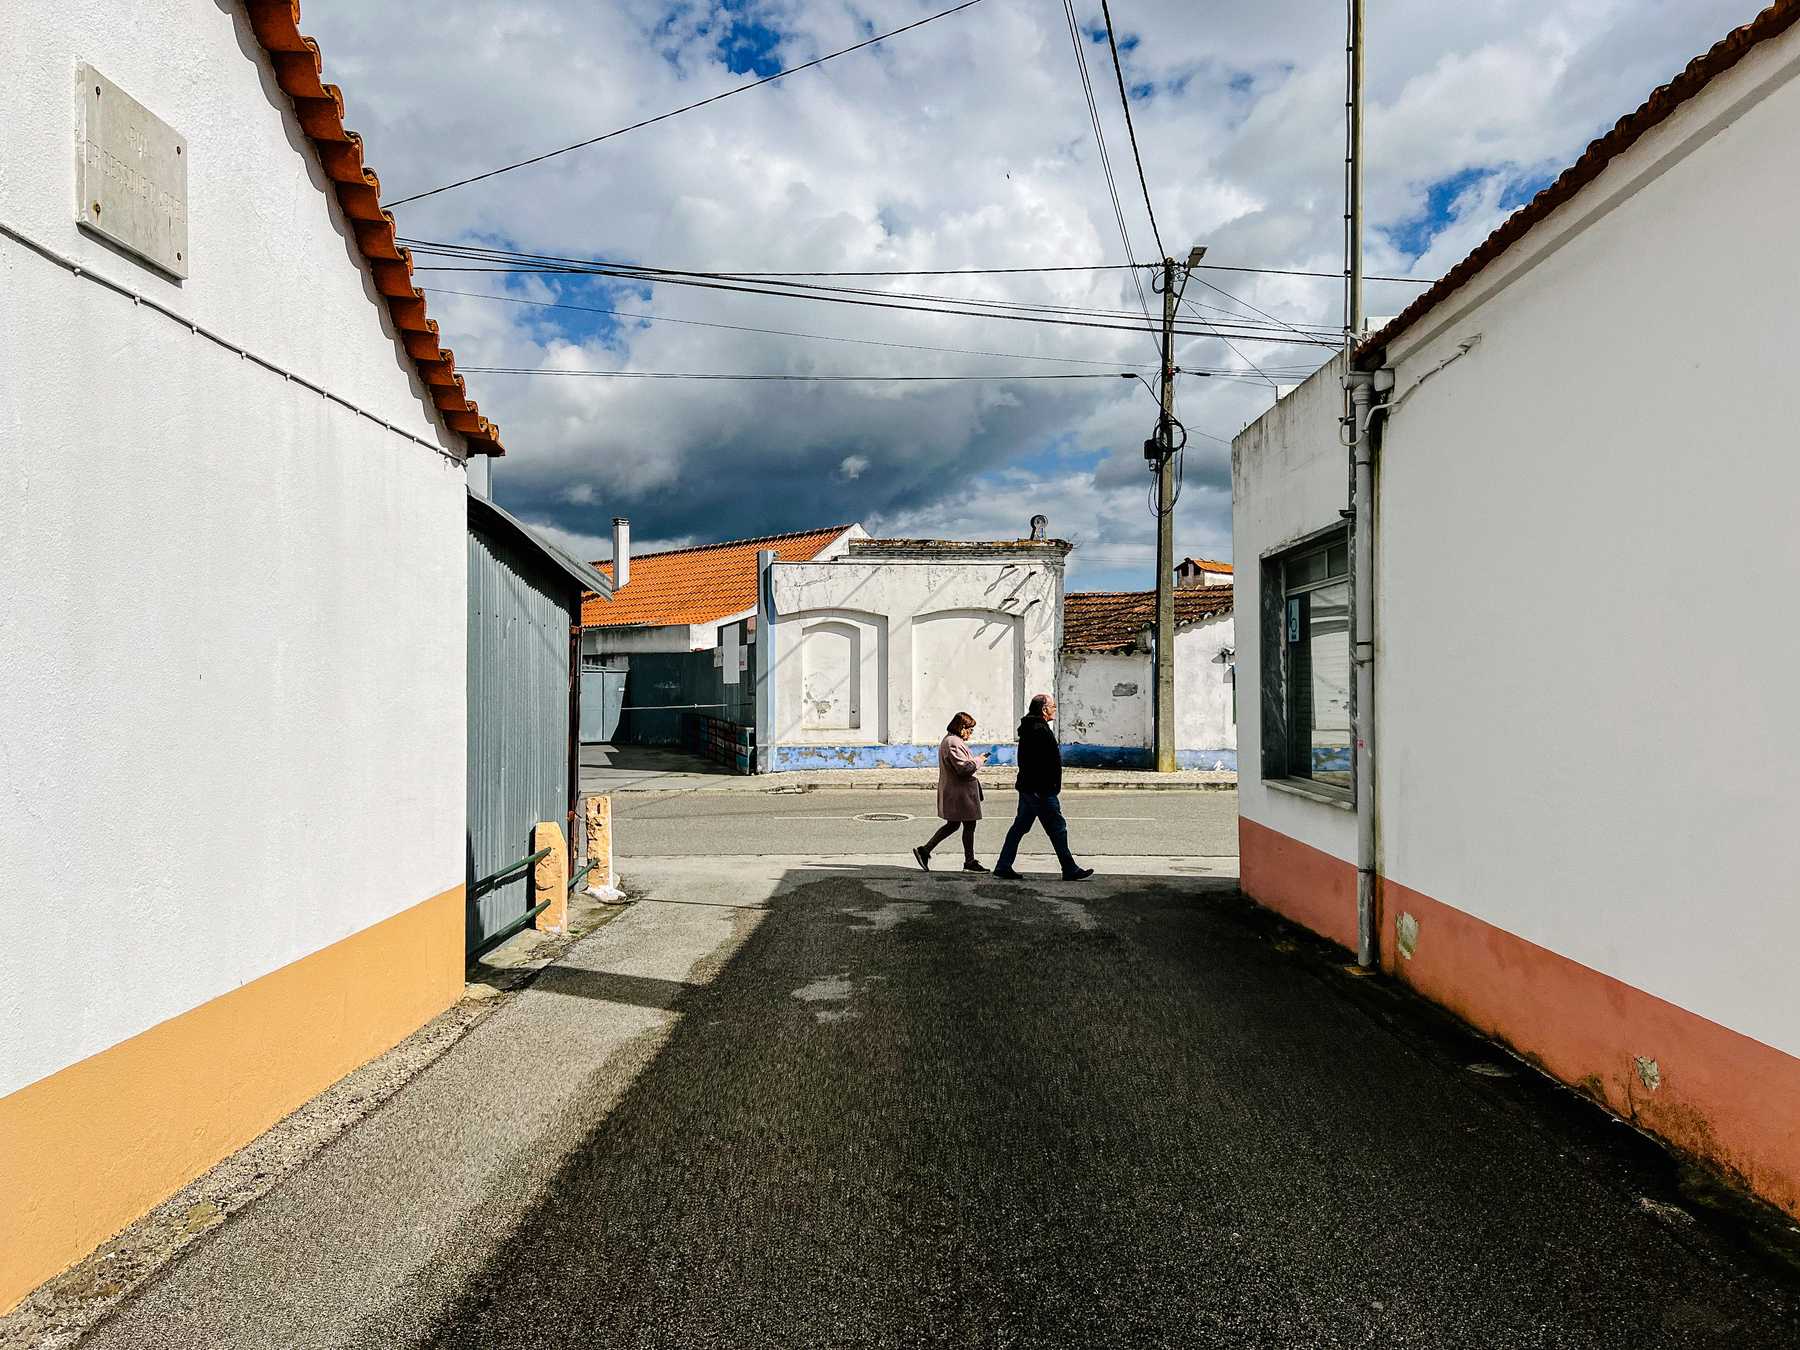 A couple is seen walking outside, surrounded by houses. Cloudy sky. 